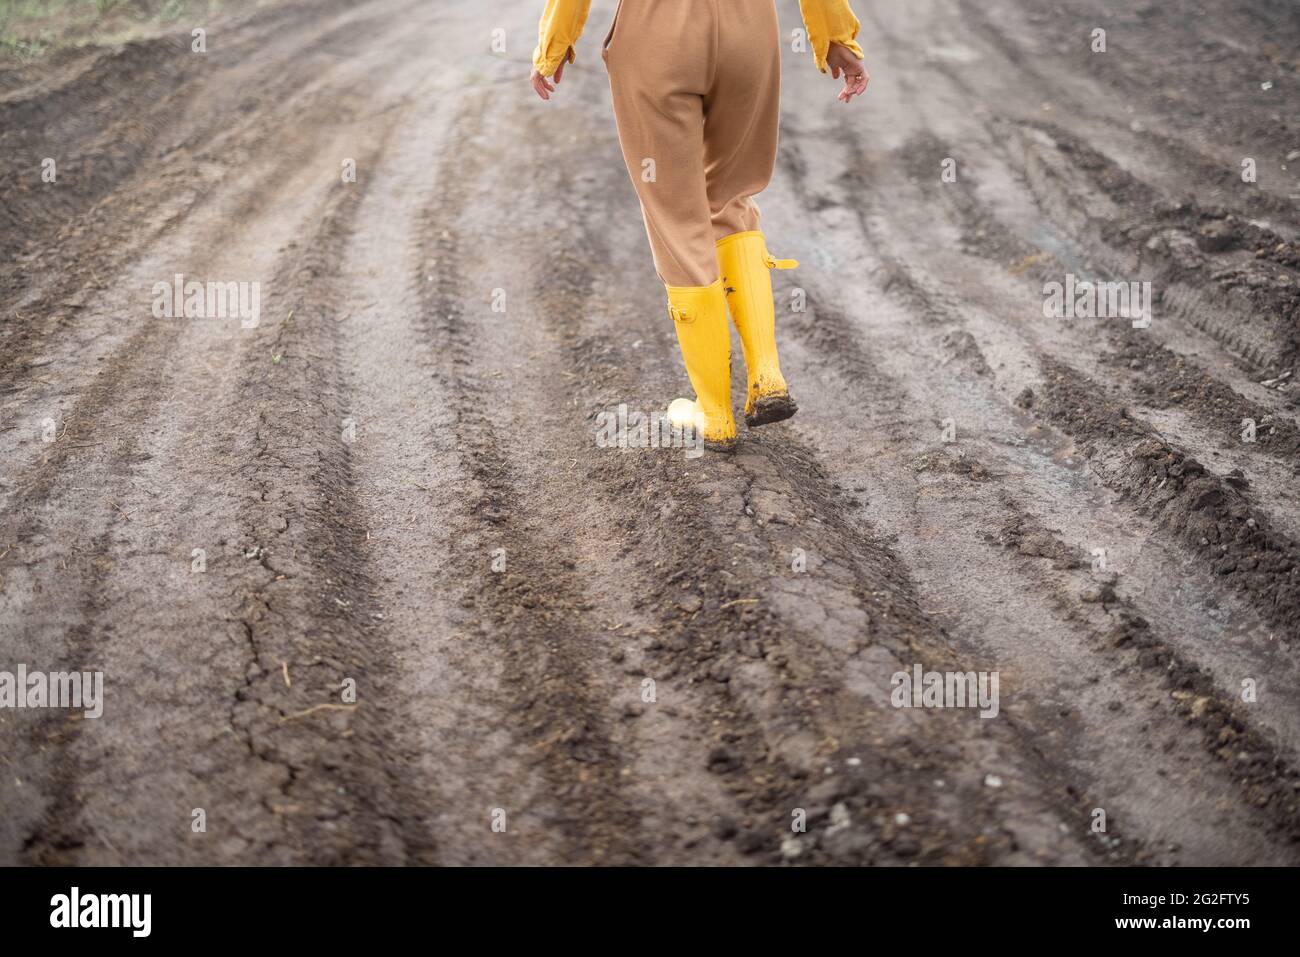 Legs of female farmer in yellow rubber boots walking through cultivated agricultural field after the rain.  Stock Photo